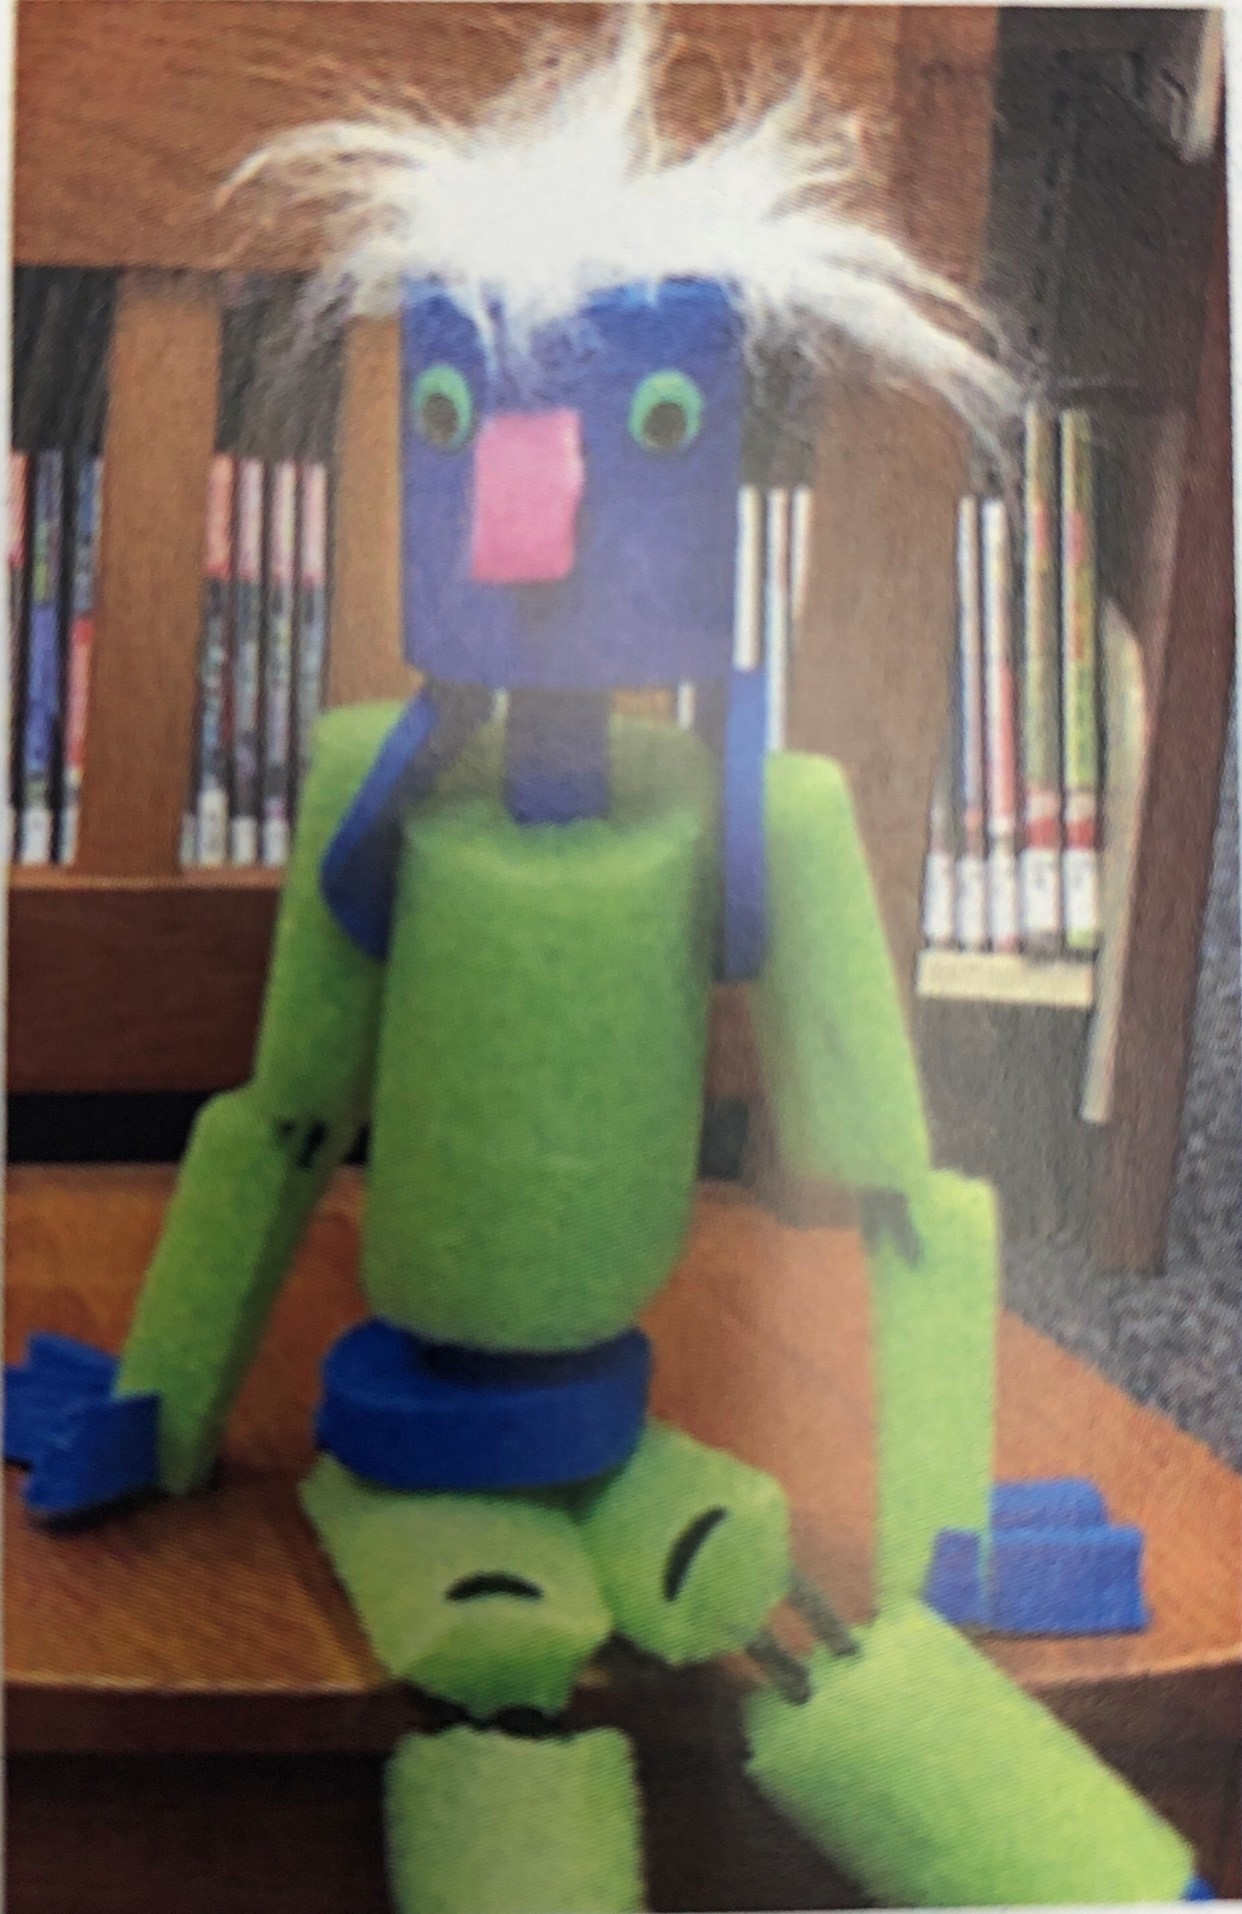 Pool Noodle Puppet made with green and purple pool noodles